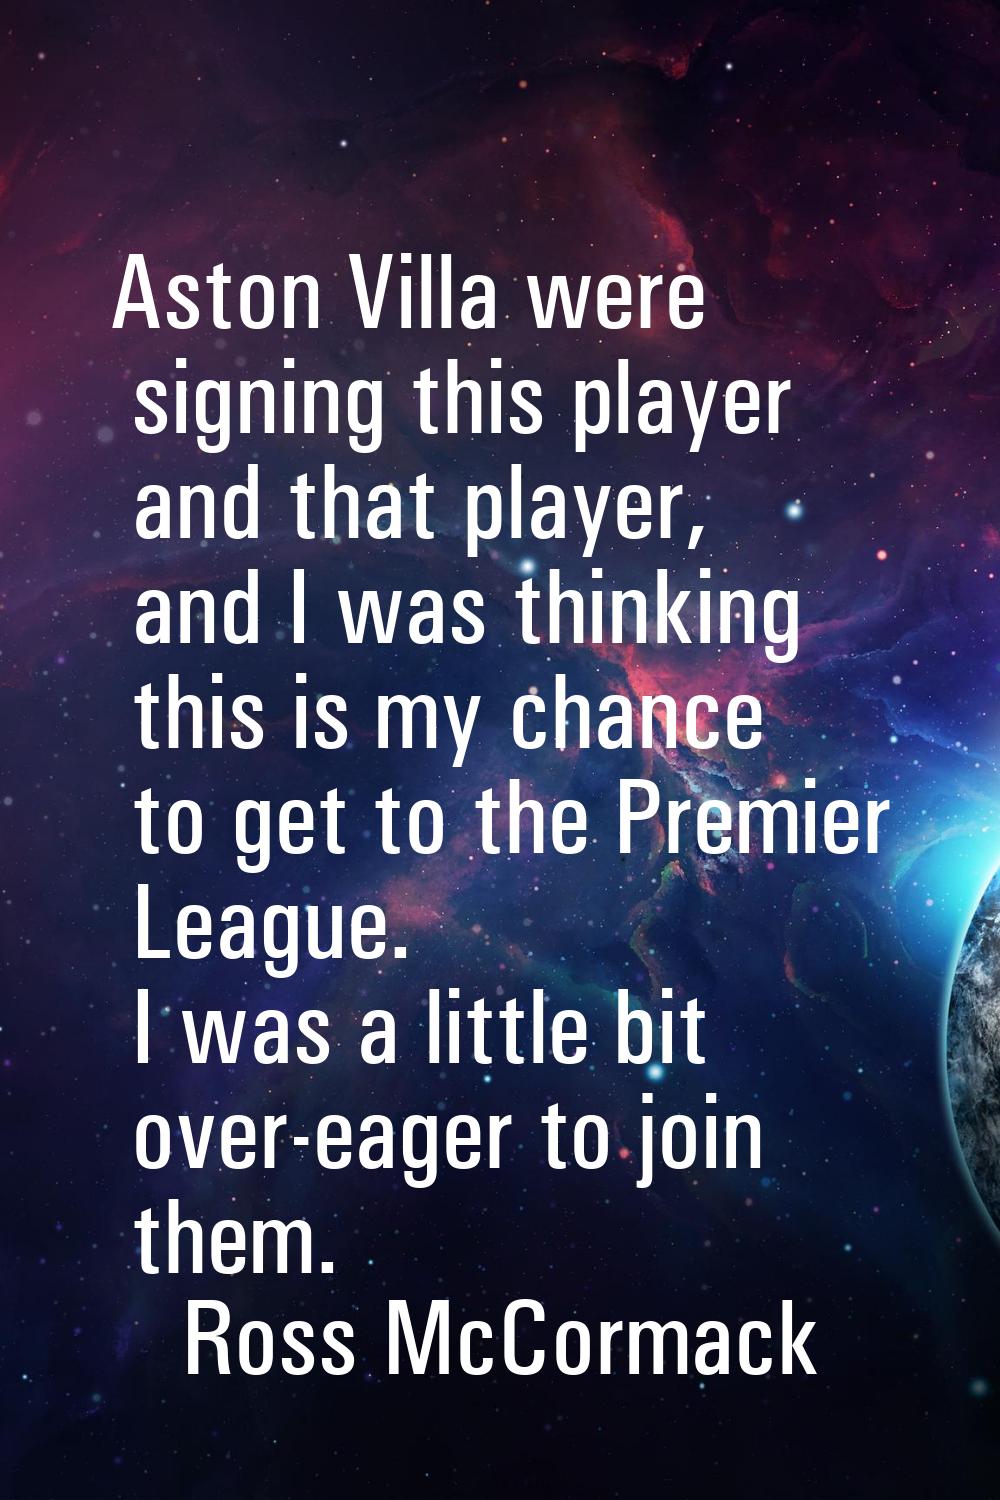 Aston Villa were signing this player and that player, and I was thinking this is my chance to get t